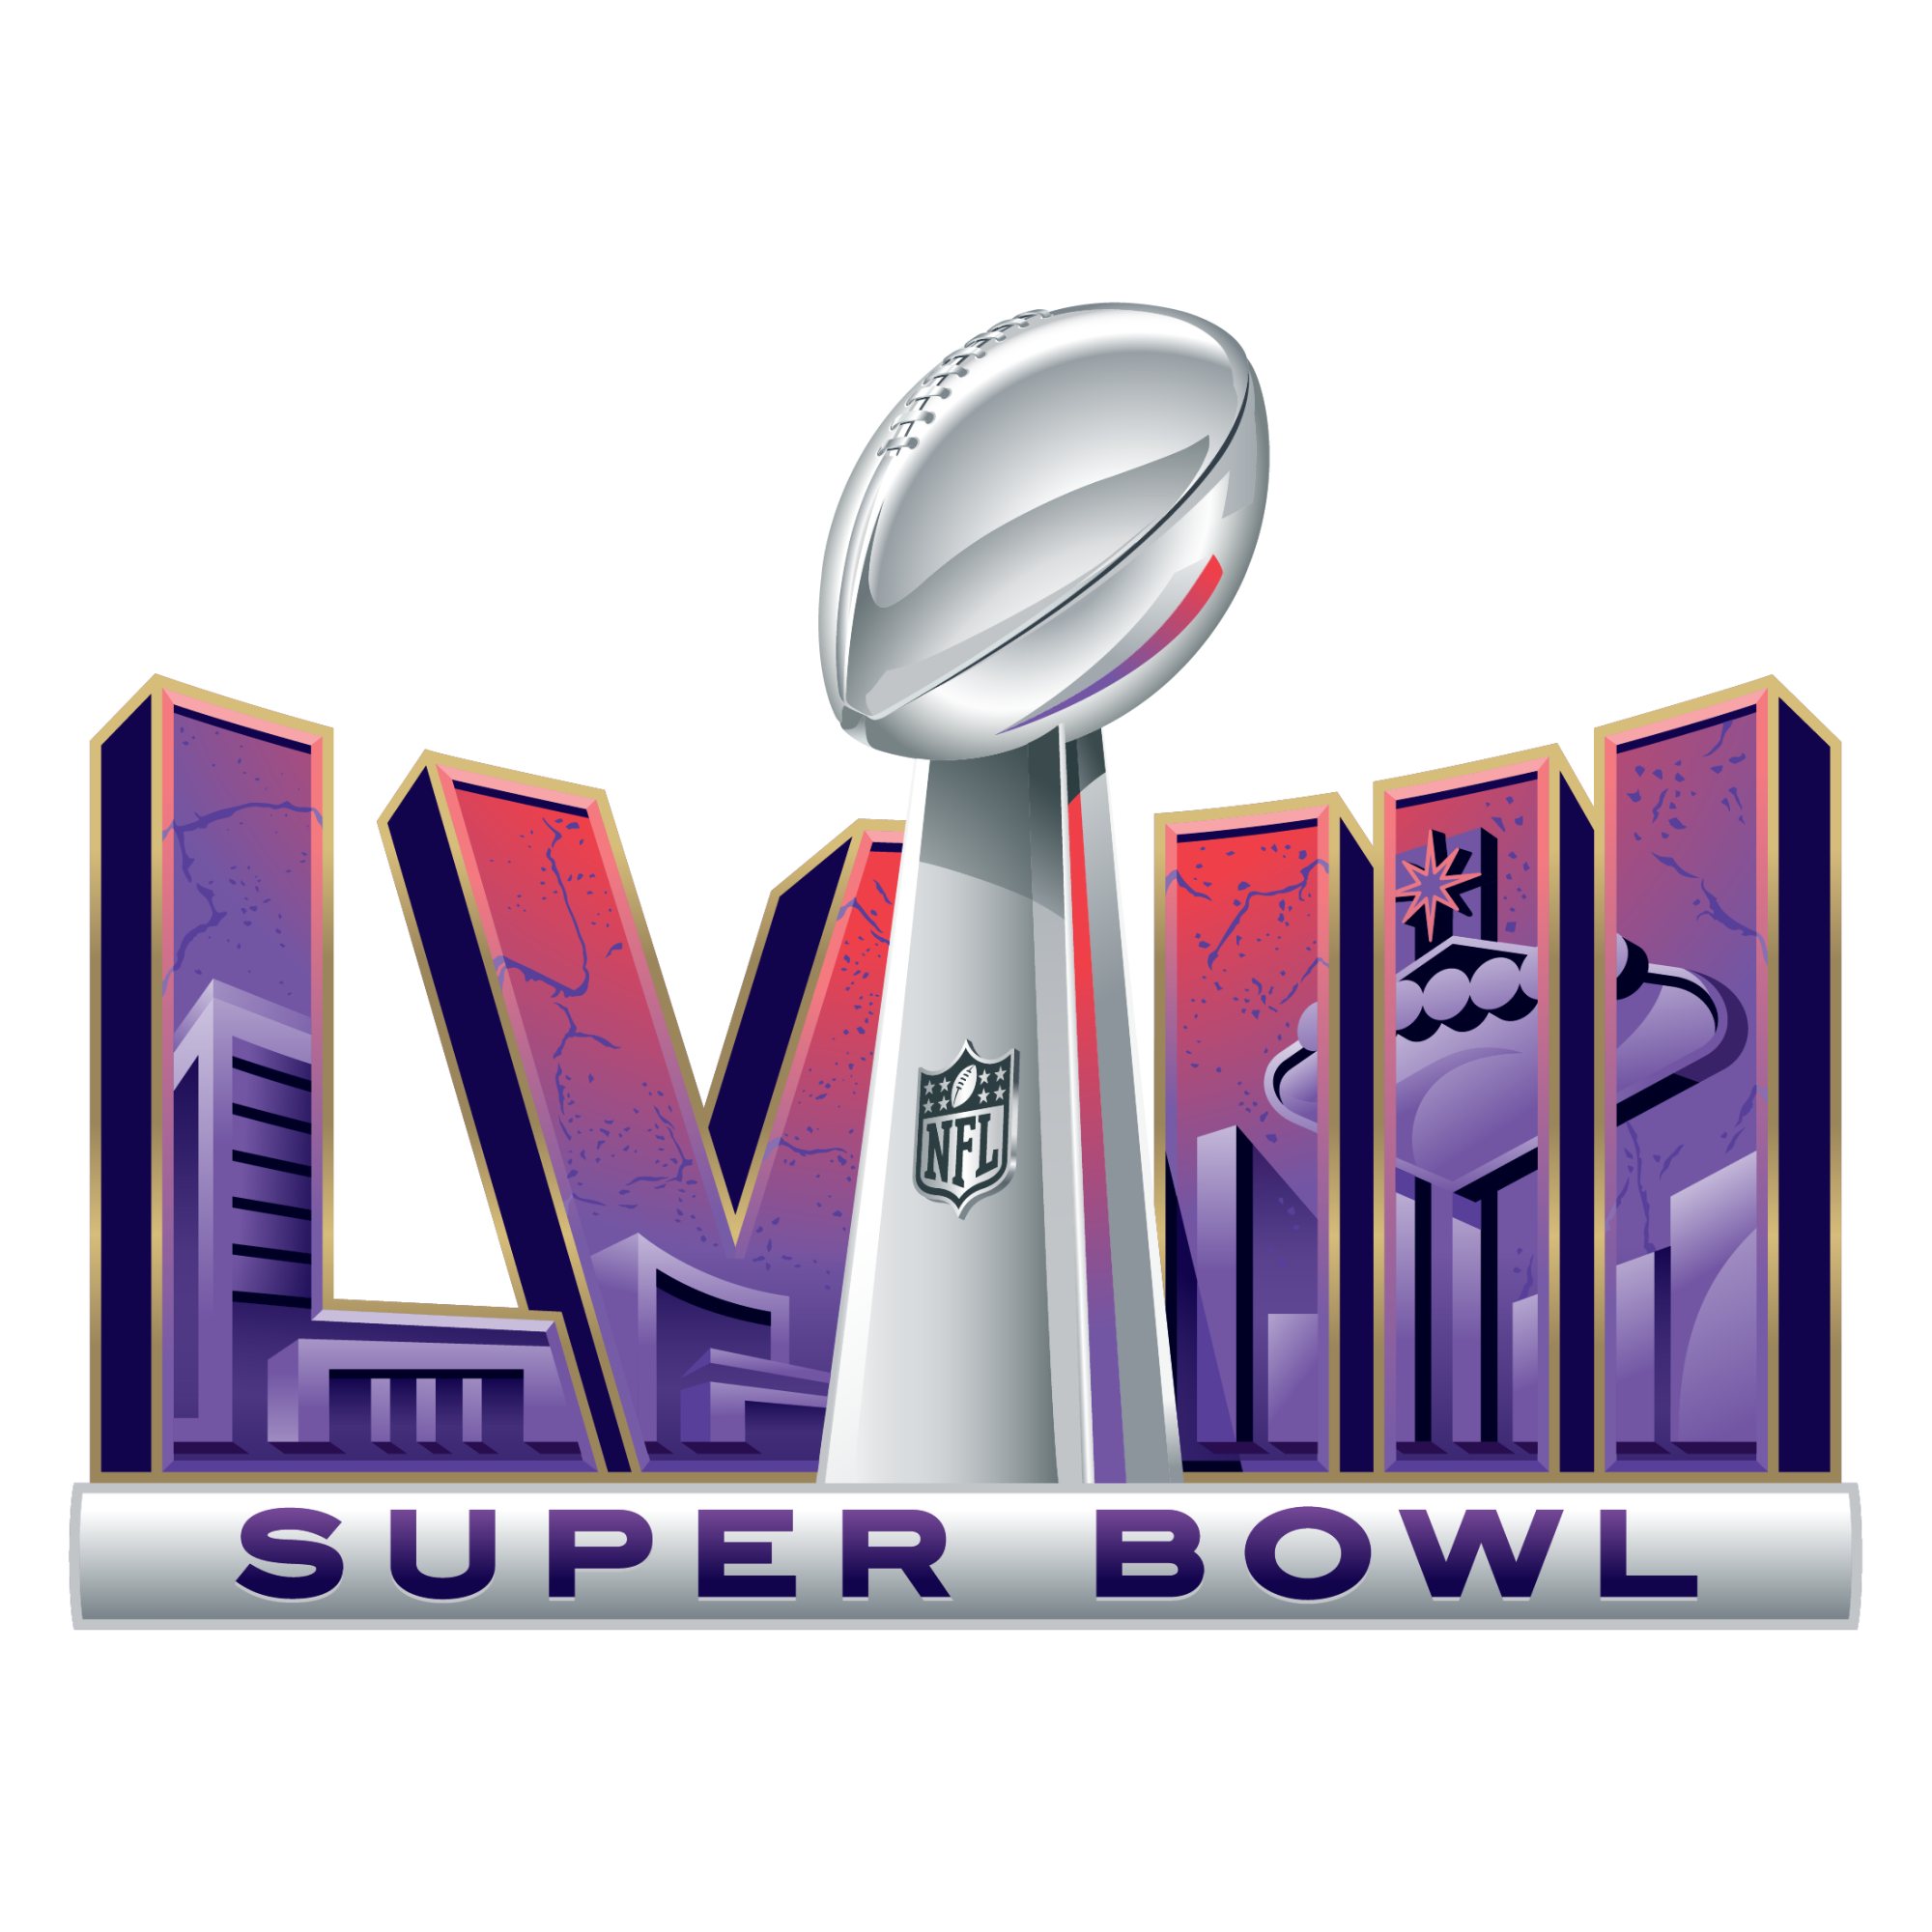 super bowl events this weekend